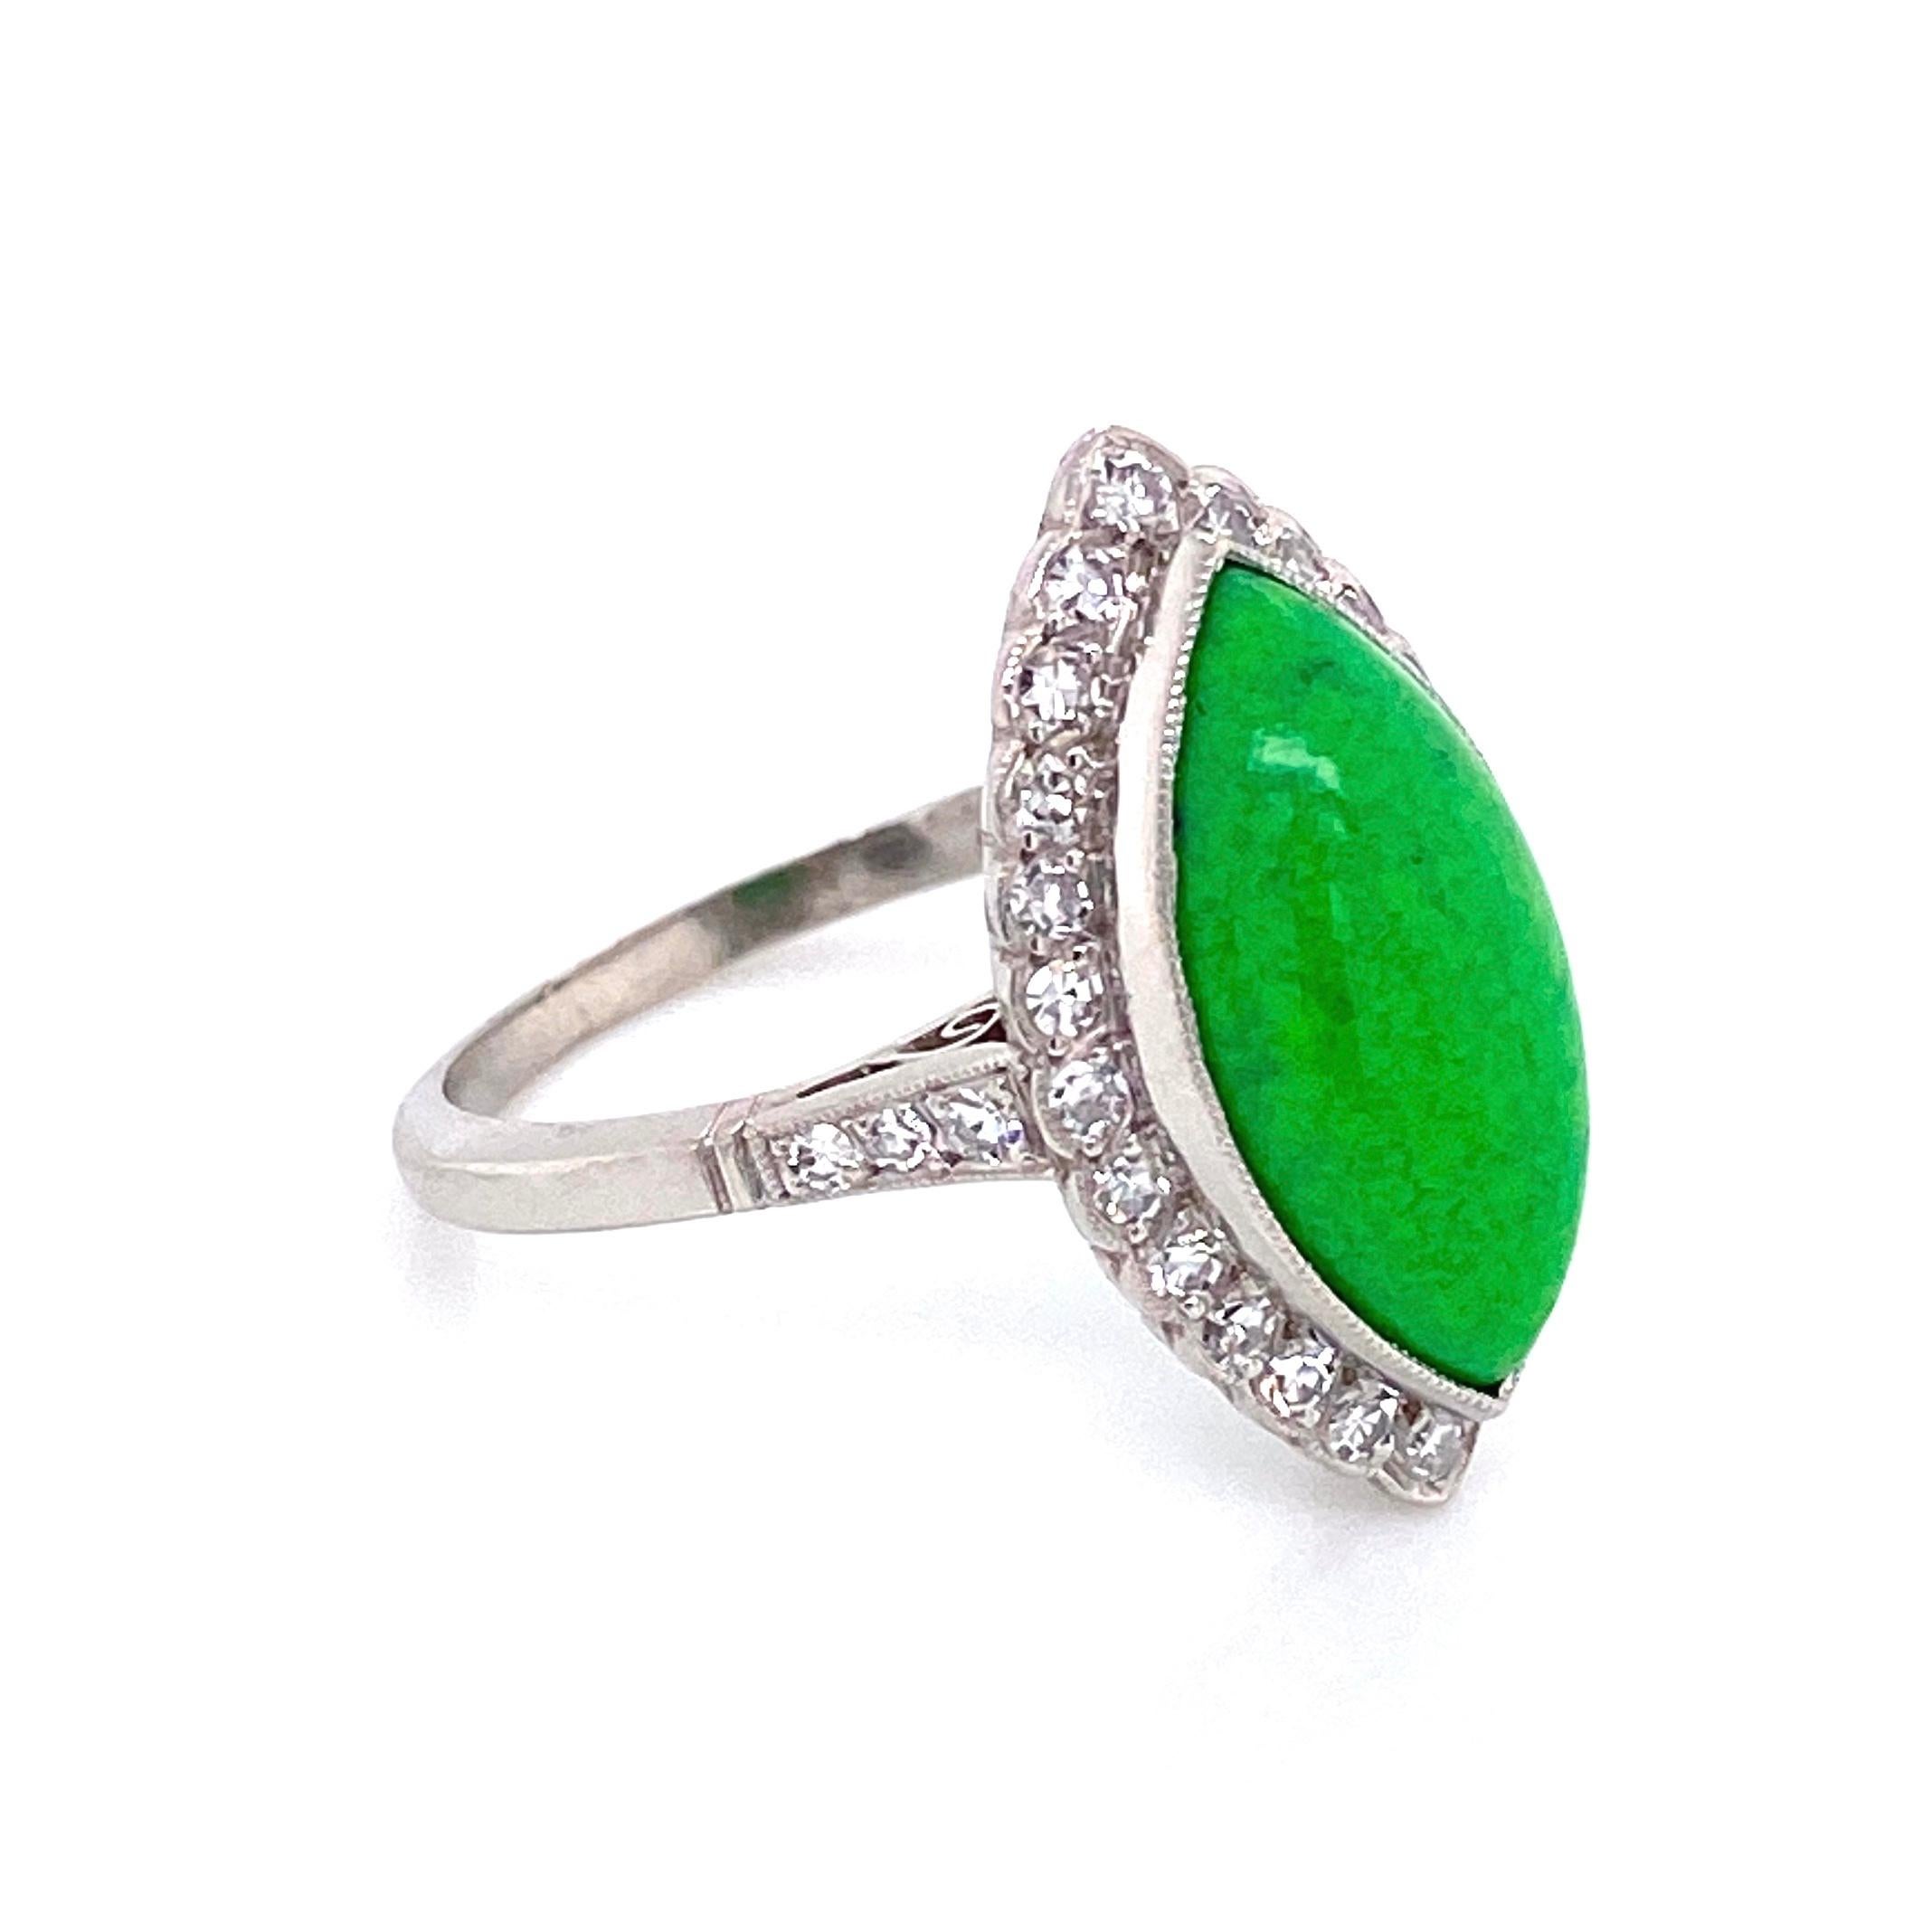 Beautiful, Elegant and finely detailed Art Deco Revival Platinum Cocktail Ring, center securely nestled with a 4 Carat Navette Green Turquoise, surrounded by Diamonds and small Diamonds enhancing the shank. Approx. total weight of Diamonds 0.42